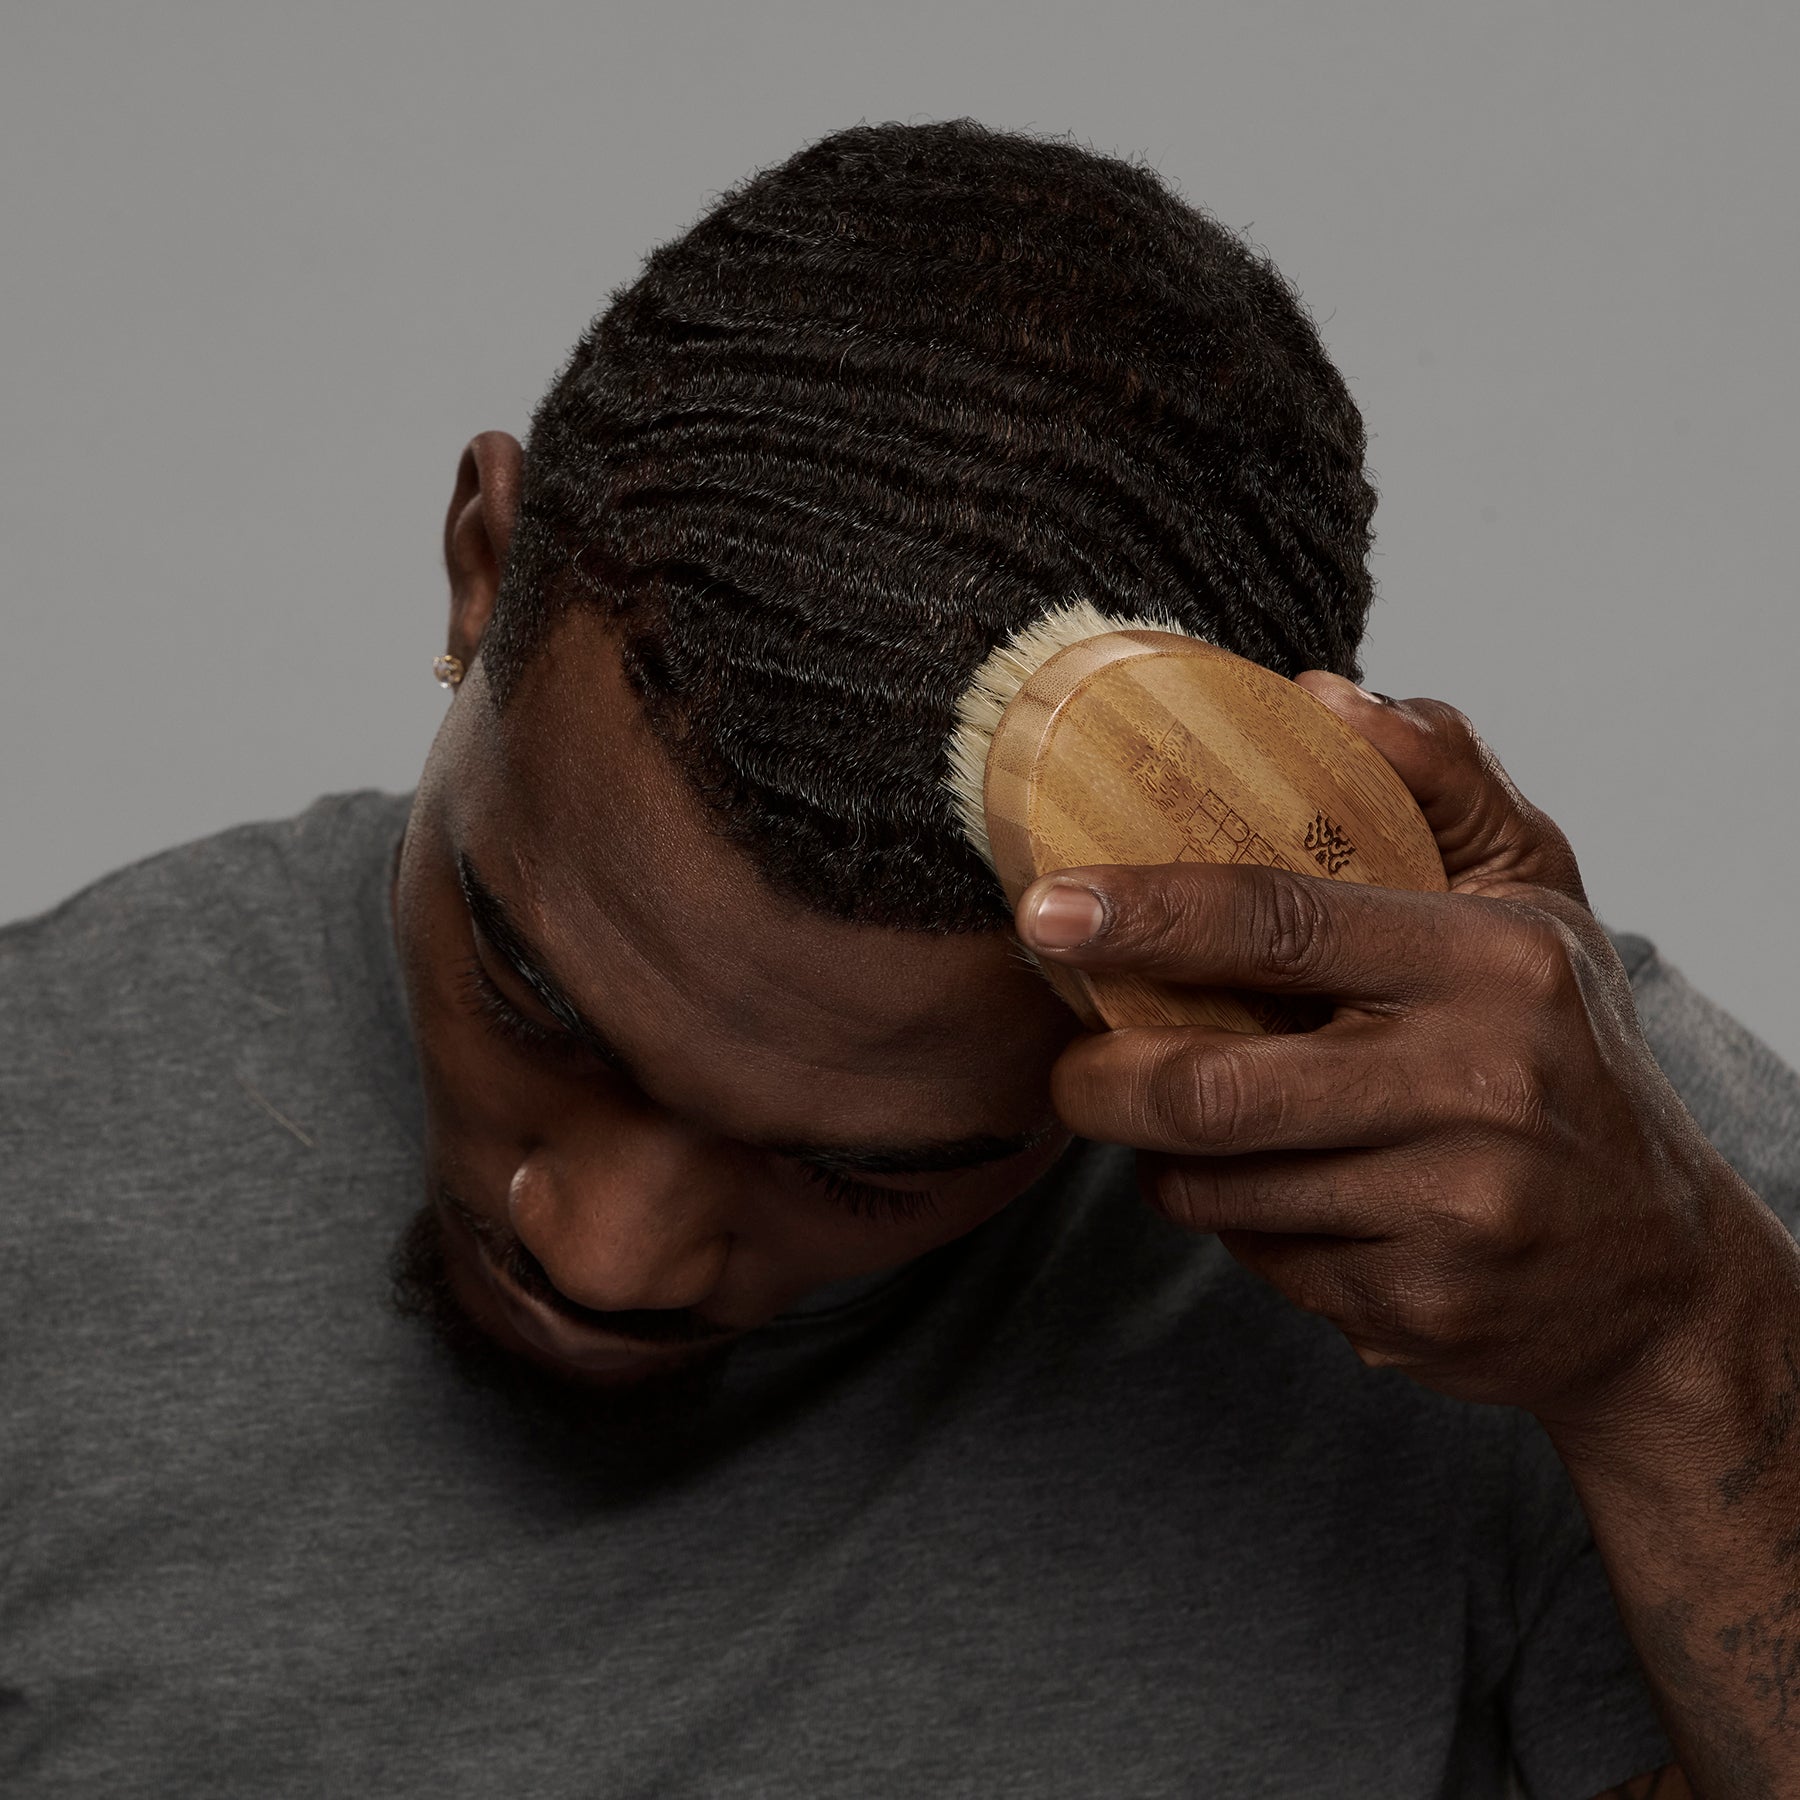 black man with waves, how to get great waves, 360 waves